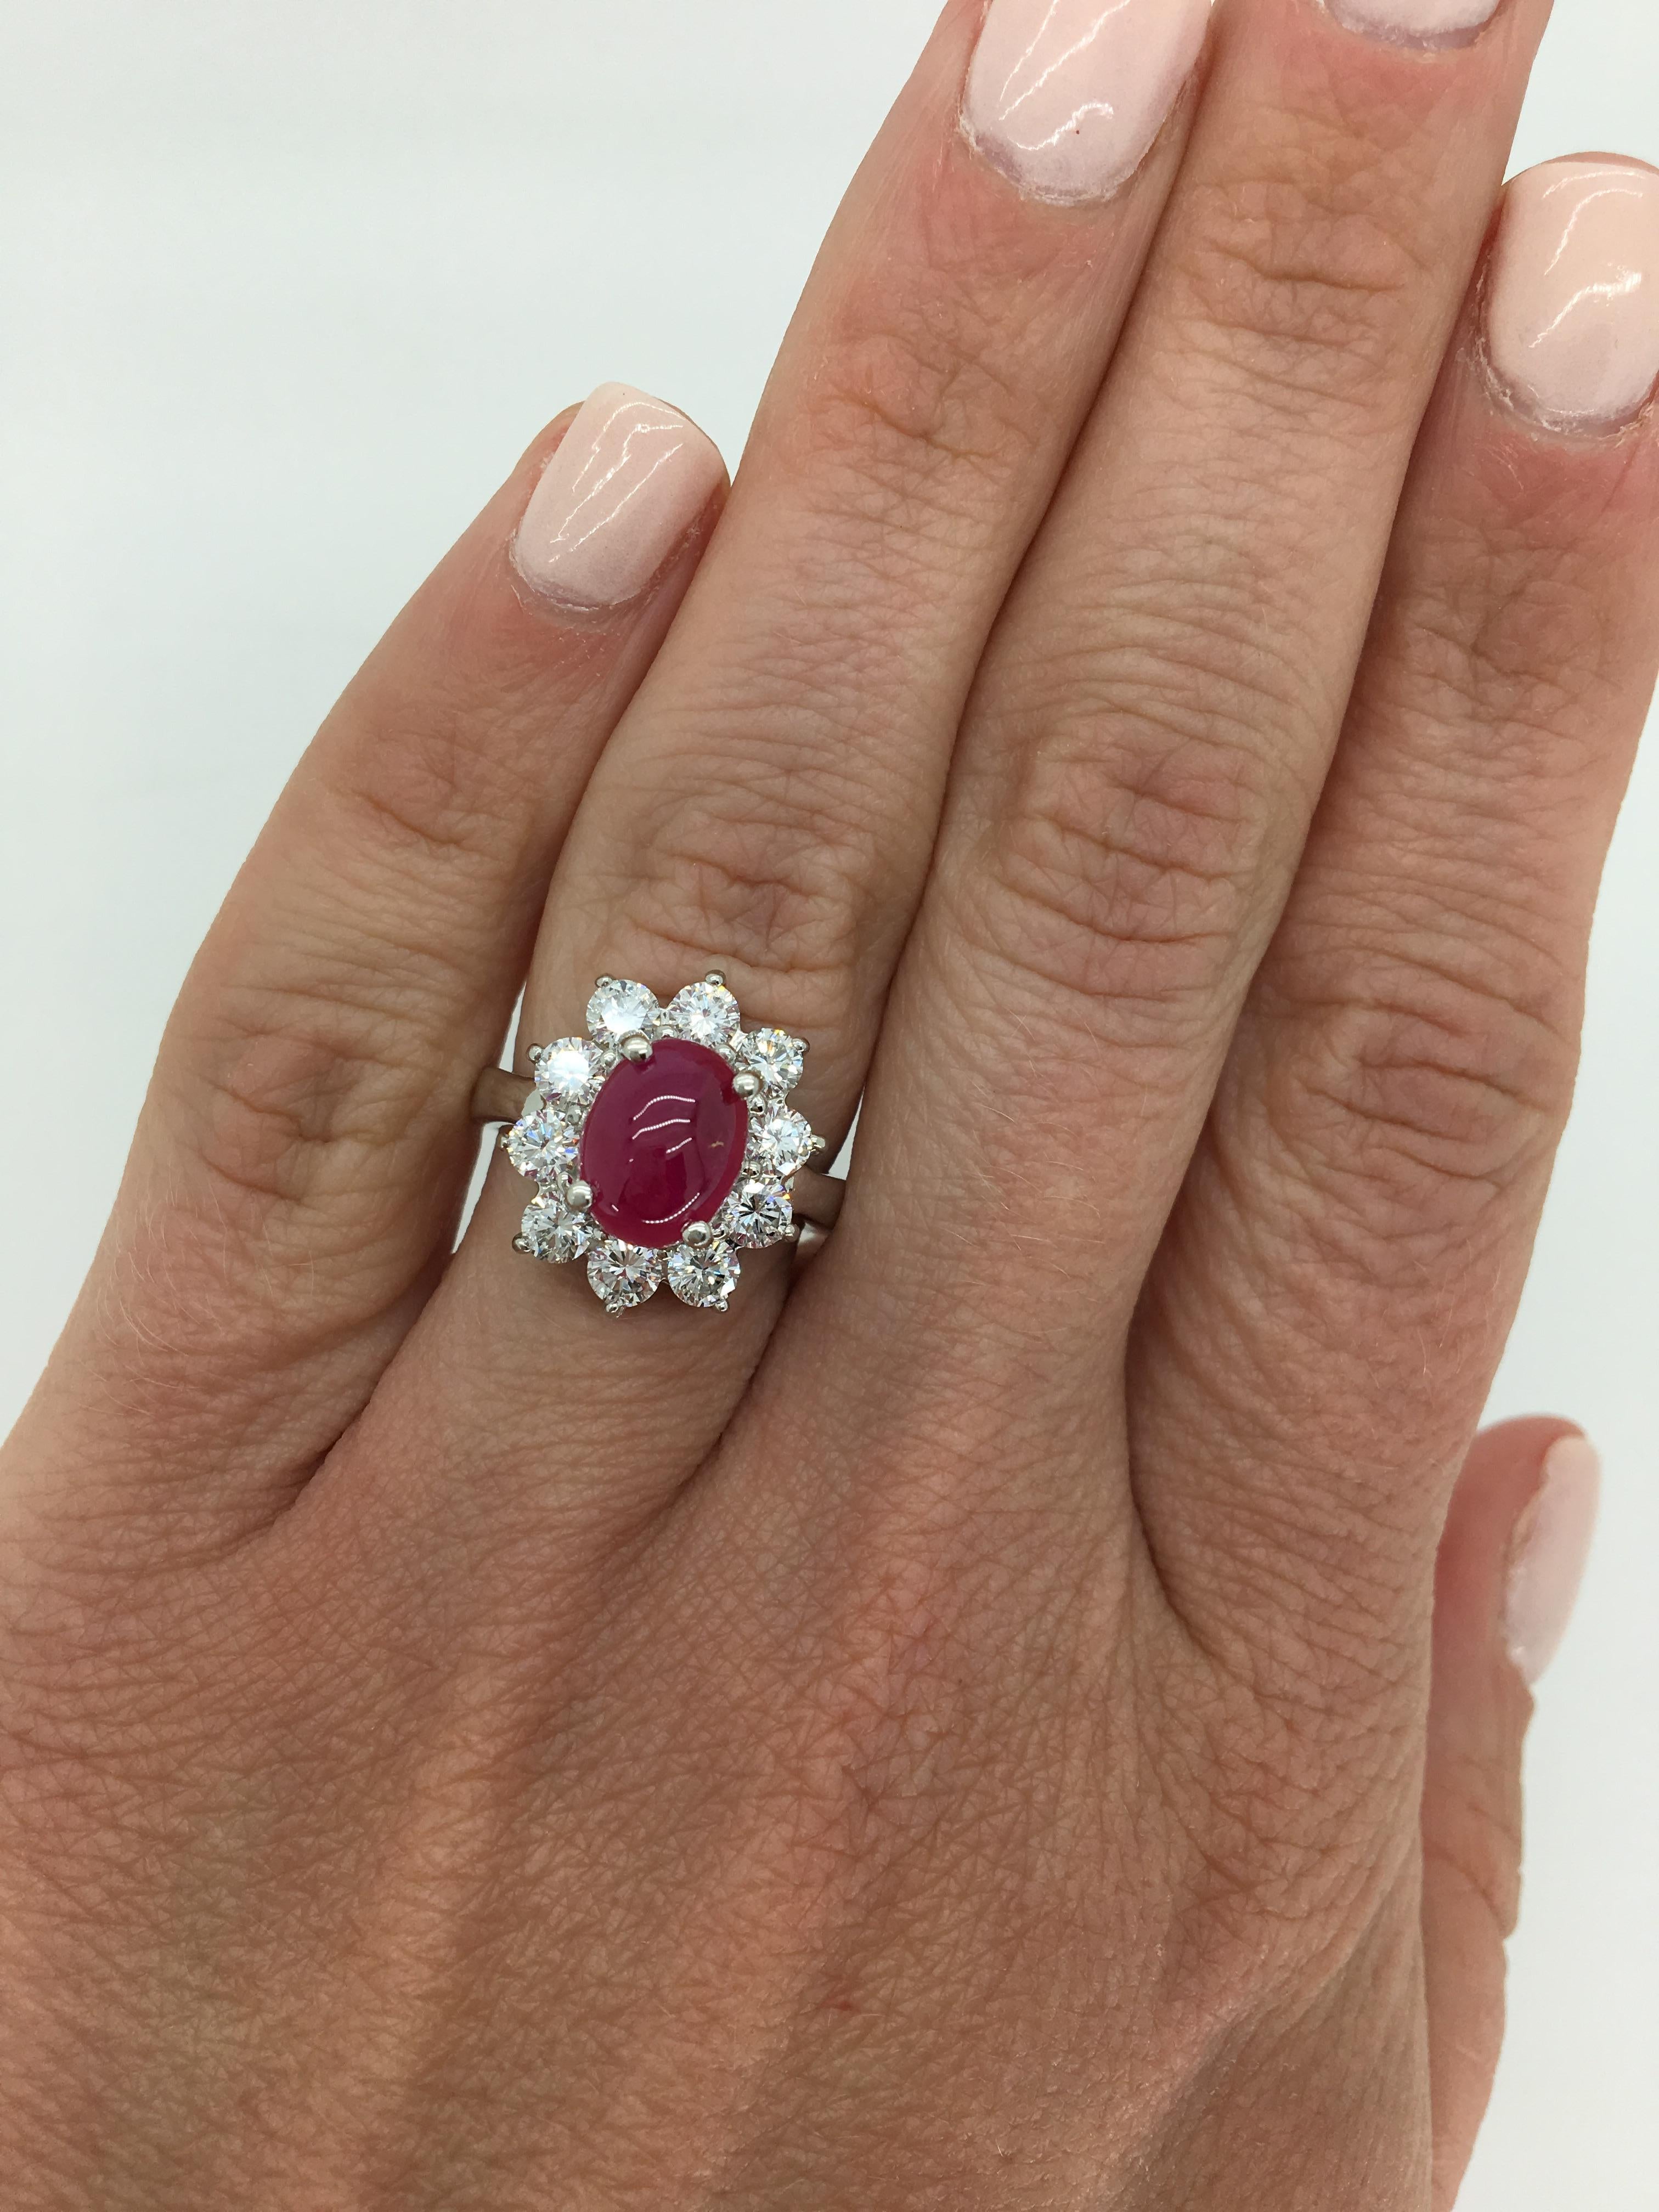 Cabochon cut certified Burma Ruby and Diamond halo ring crafted in platinum.

GIA Certified Report # 6173771491
Gemstone: Ruby & Diamond
Gemstone Carat Weight: Approximately 3.00CT Double Cabochon Cut
Diamond Carat Weight:  Approximately